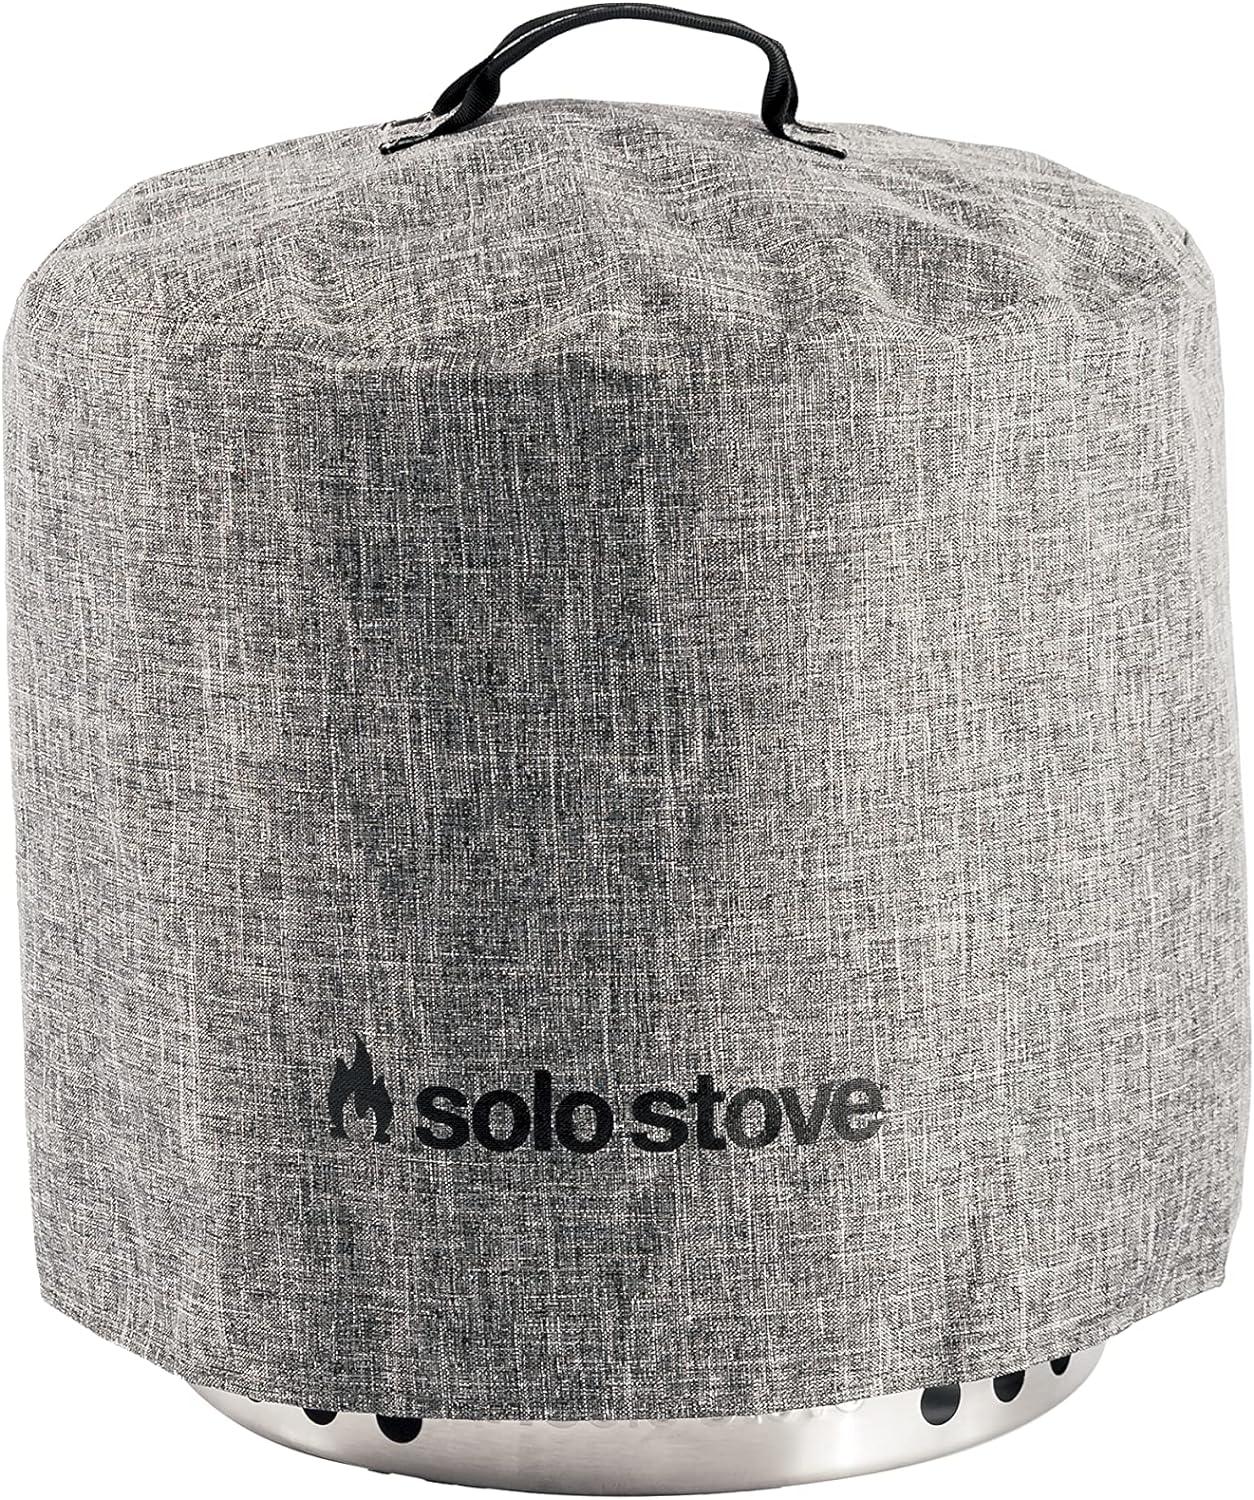 Solo Stove Shelter Protective Fire Pit Cover for Round Fire Pits Waterproof Cover Great Fire Pit Accessories for Camping and Outdoors - TRAPSKI, LLC